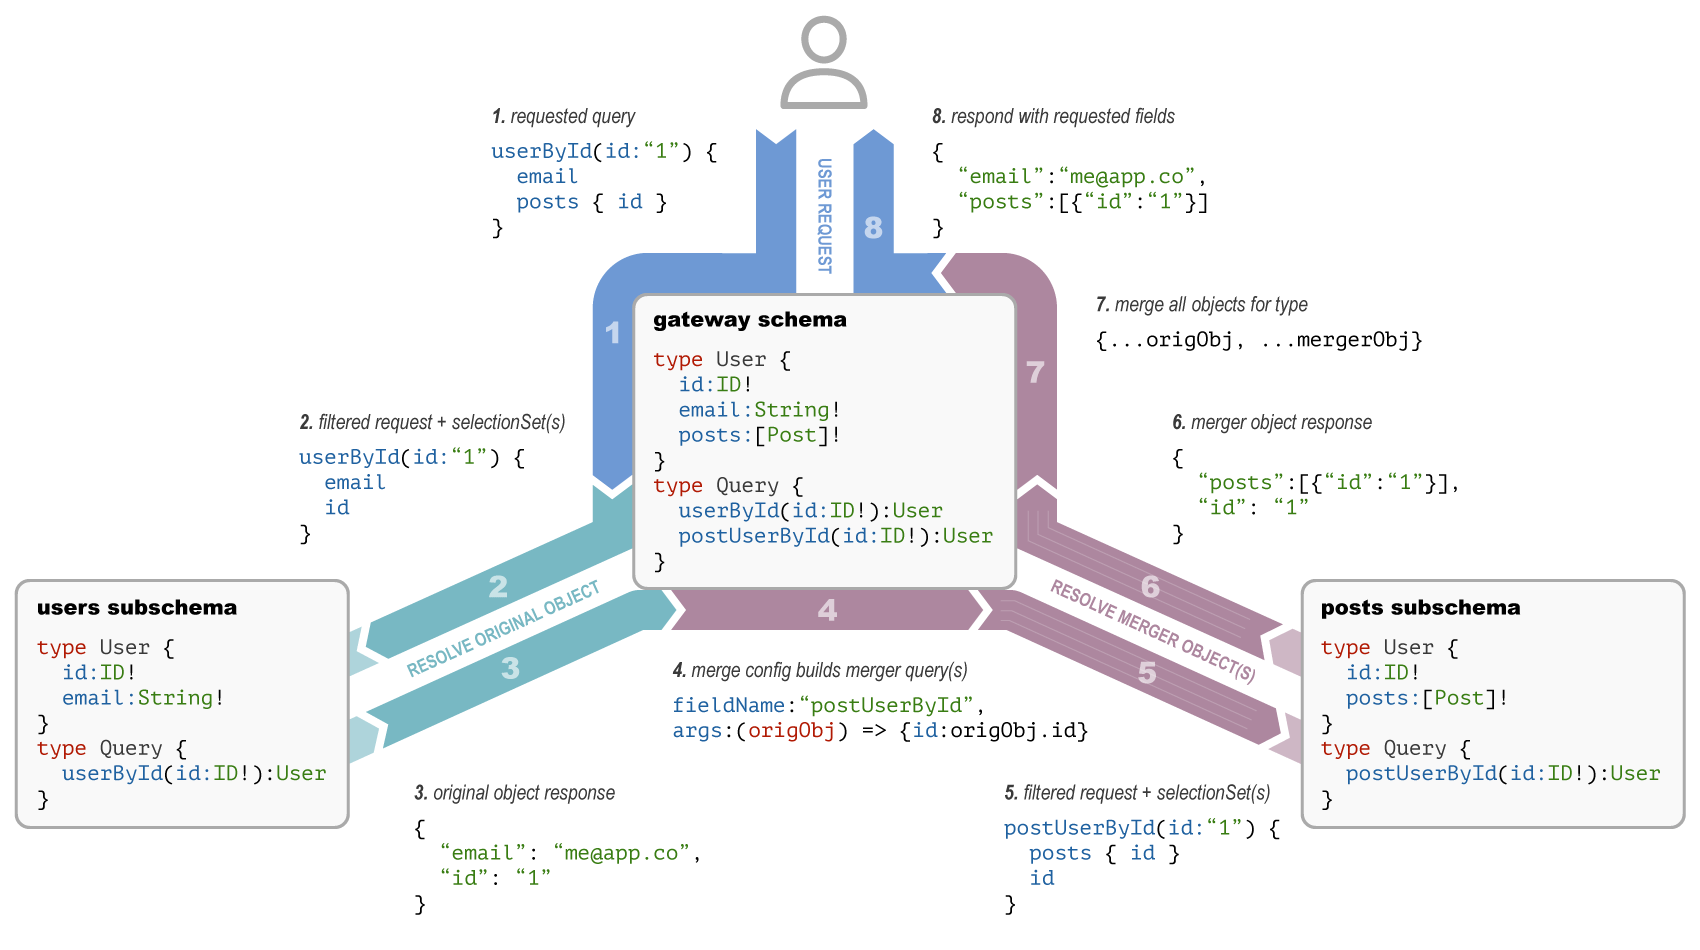 A diagram showing a stitched gateway schema and sub-services.